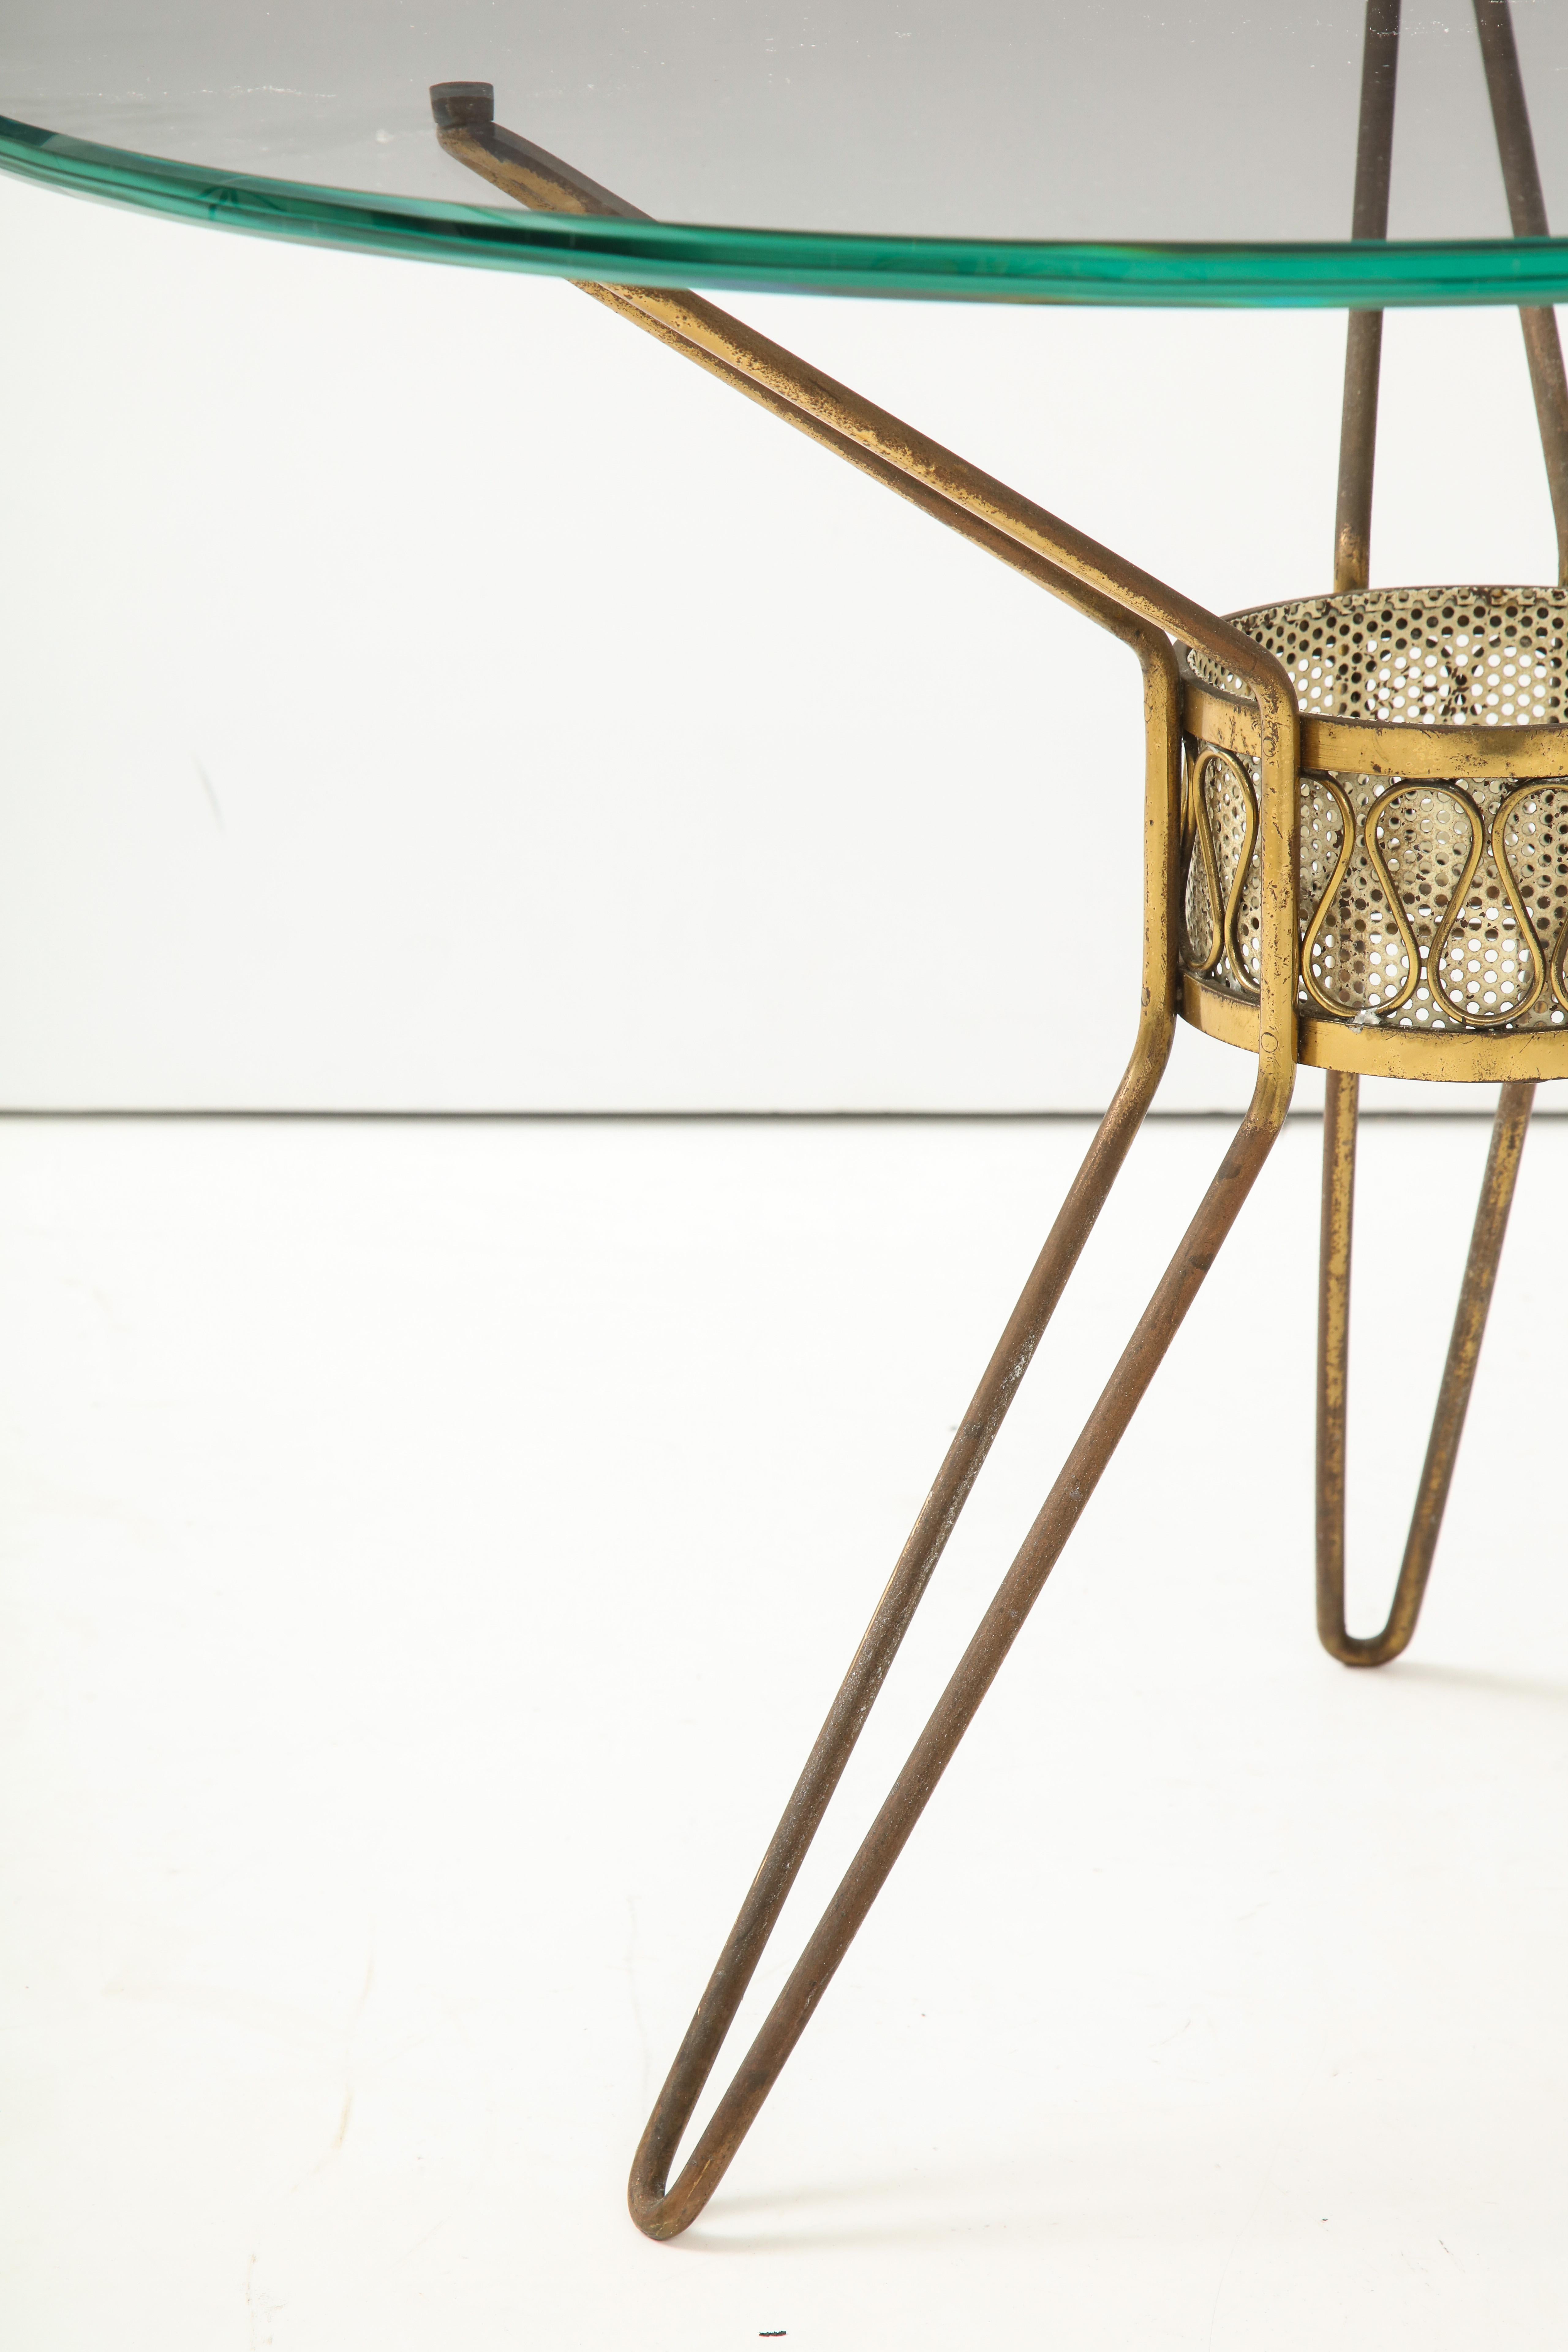 Mid-Century Modern Gio Ponti Style Occasional Tripod Table, of the Period, Italy, circa 1950s